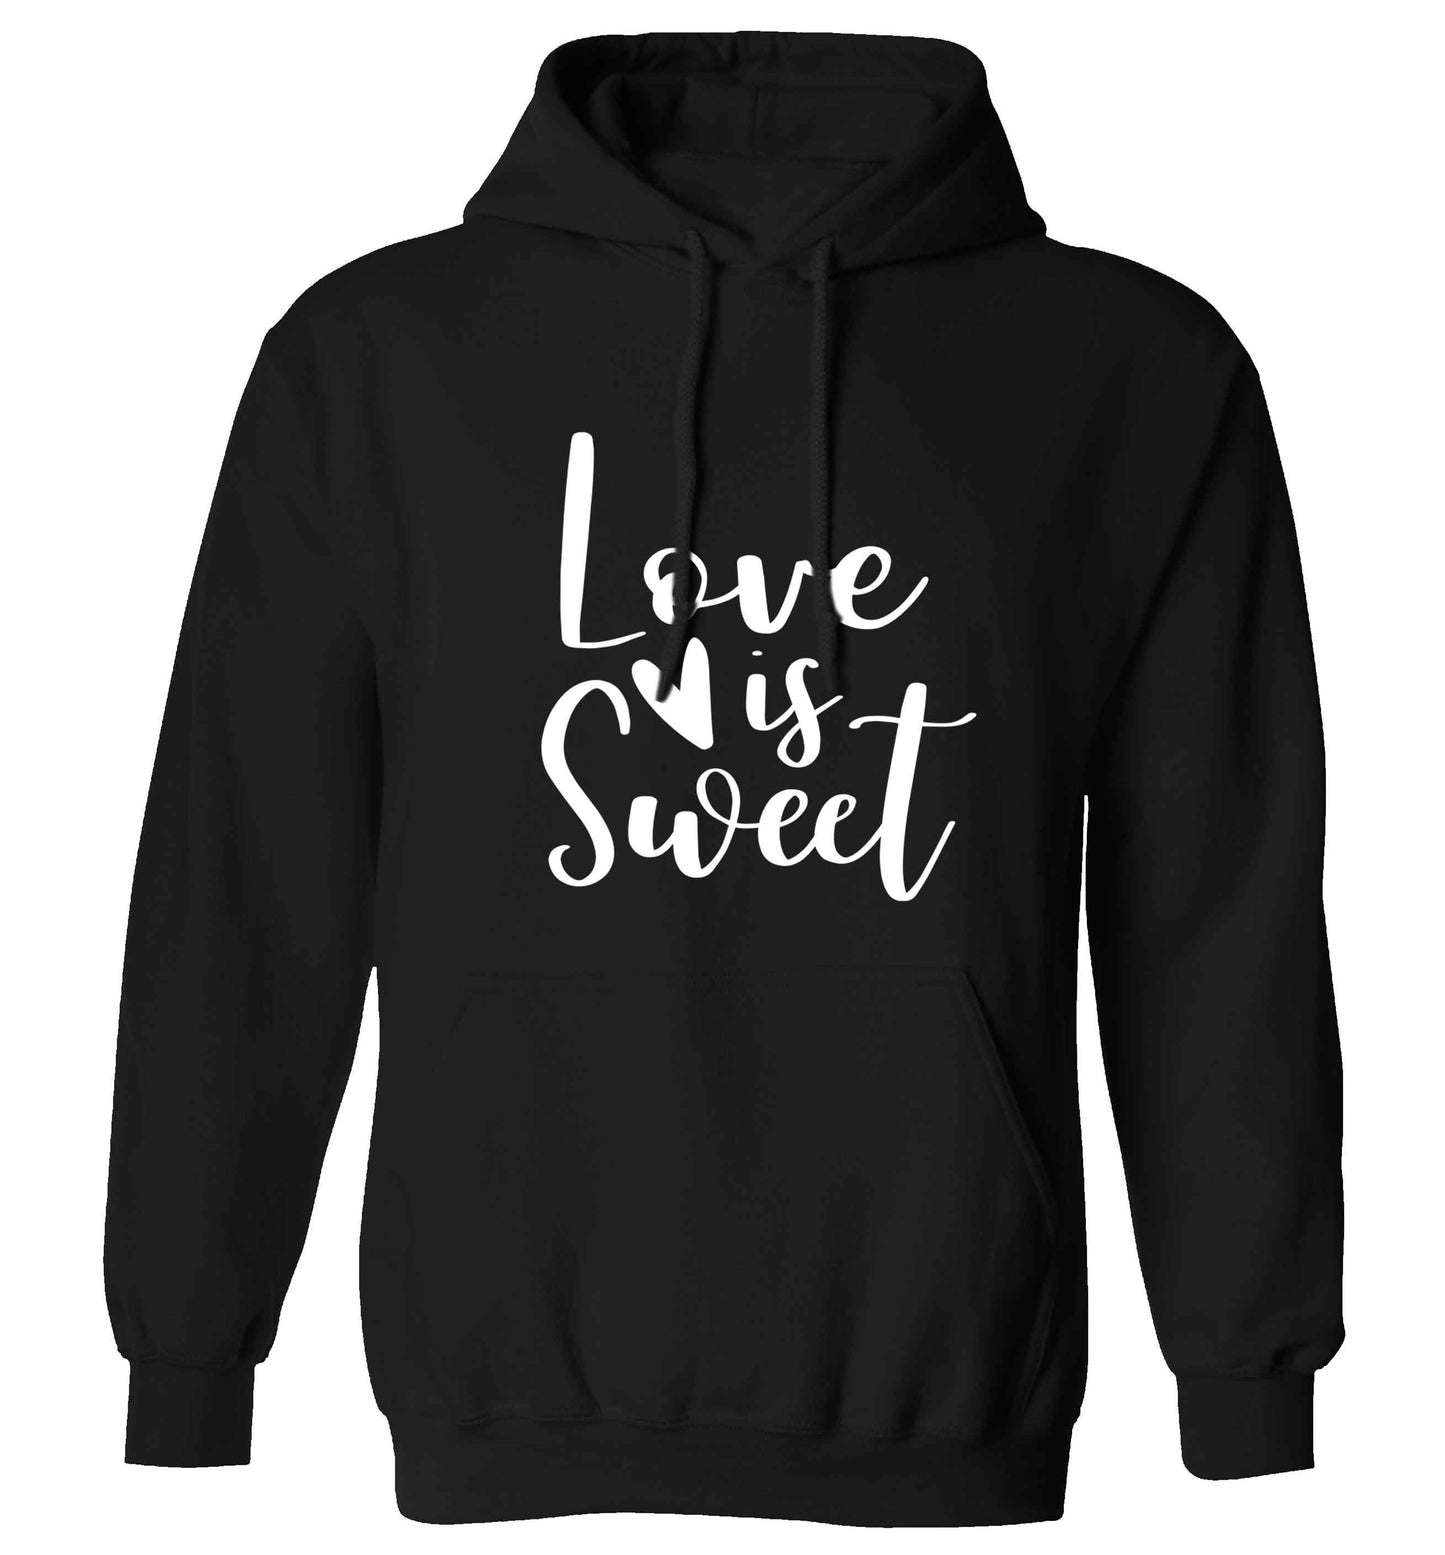 Love really does make the world go round! Ideal for weddings, valentines or just simply to show someone you love them!  adults unisex black hoodie 2XL